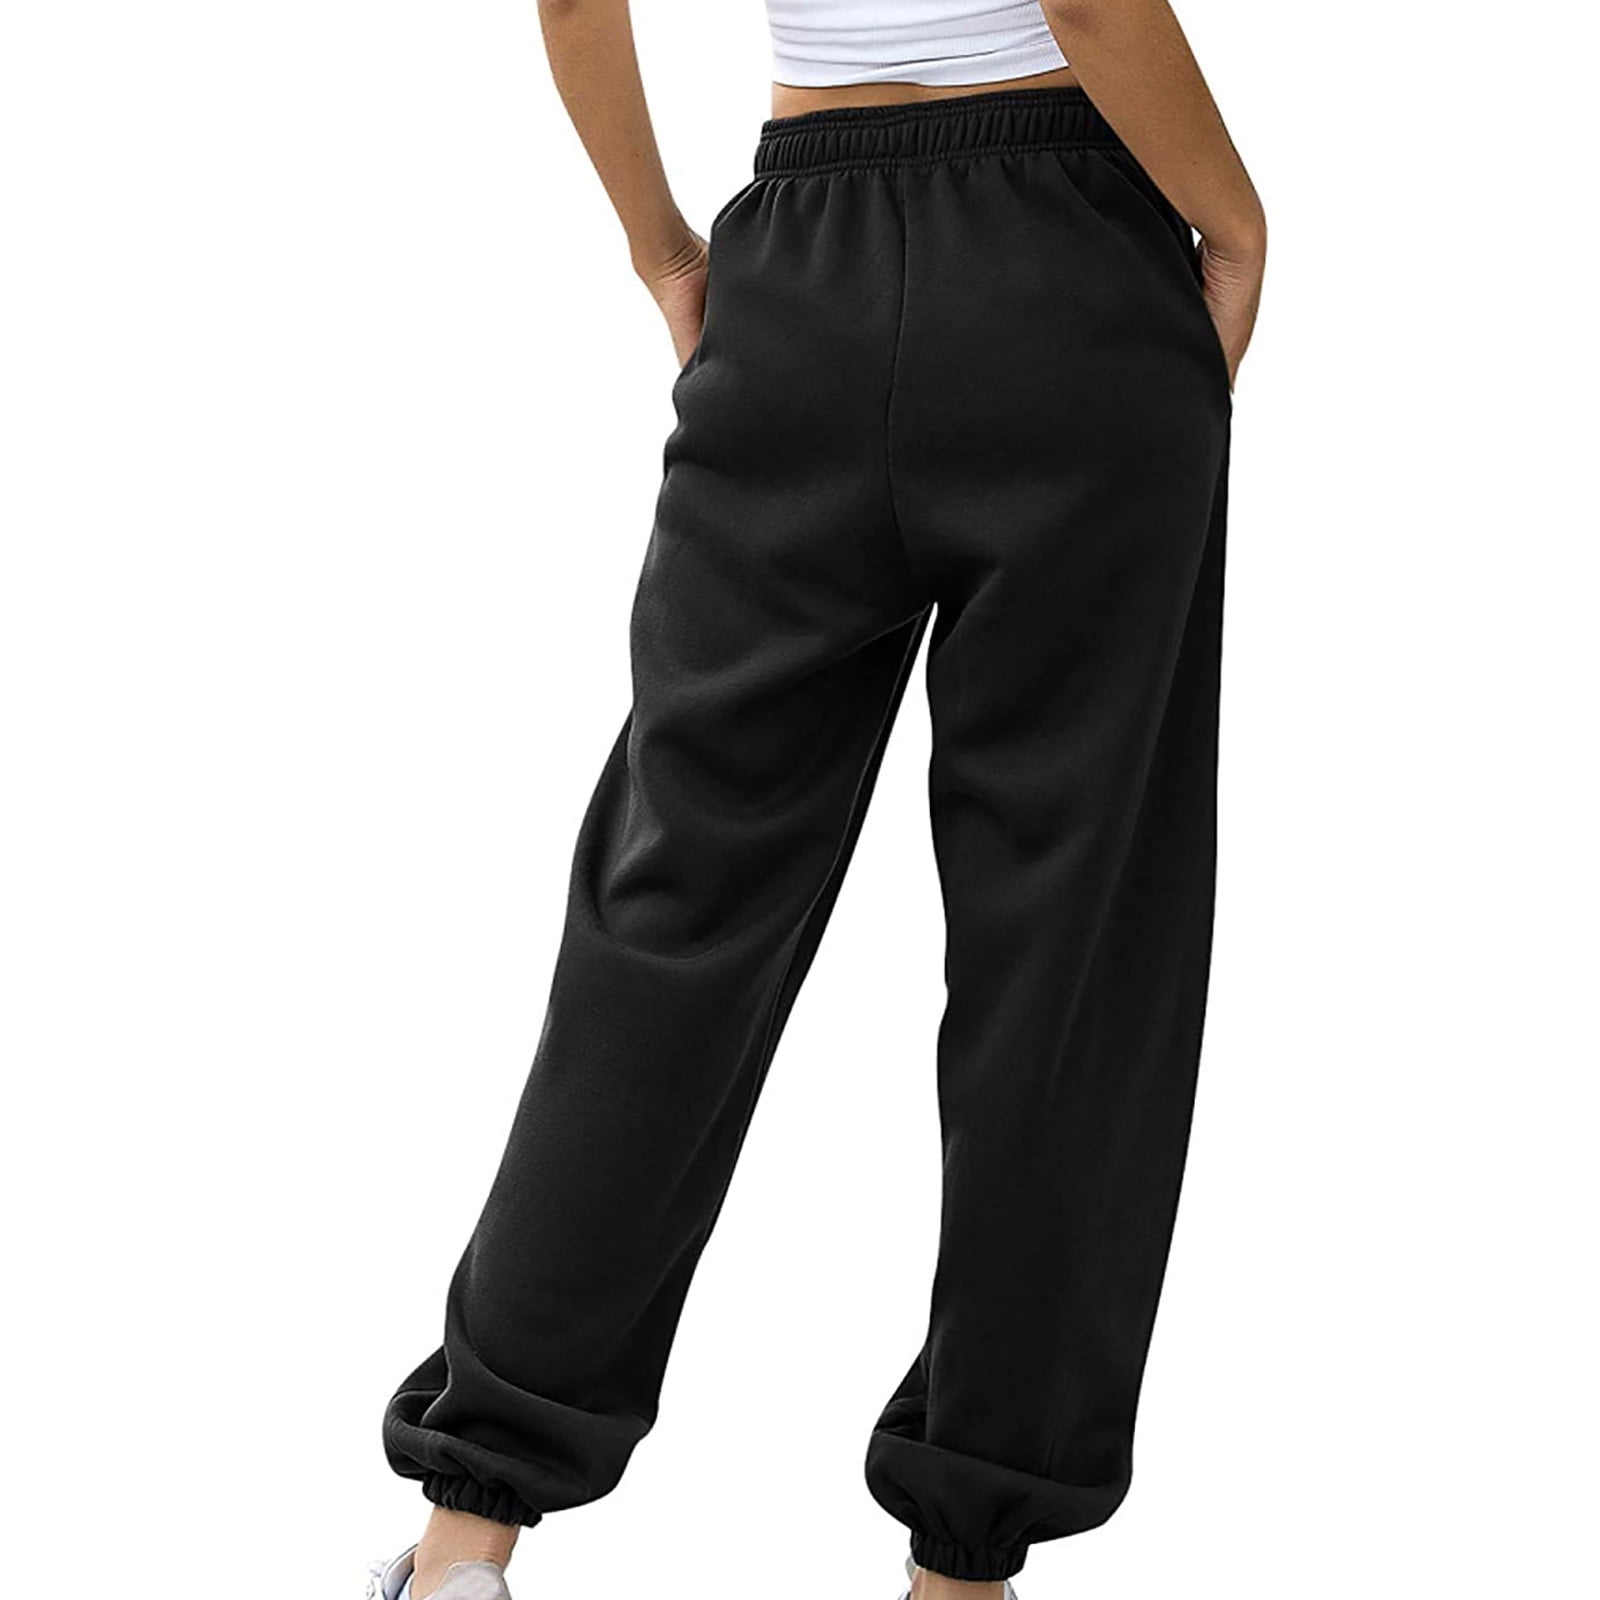 Can You Wear Sweatpants To The Gym? – solowomen